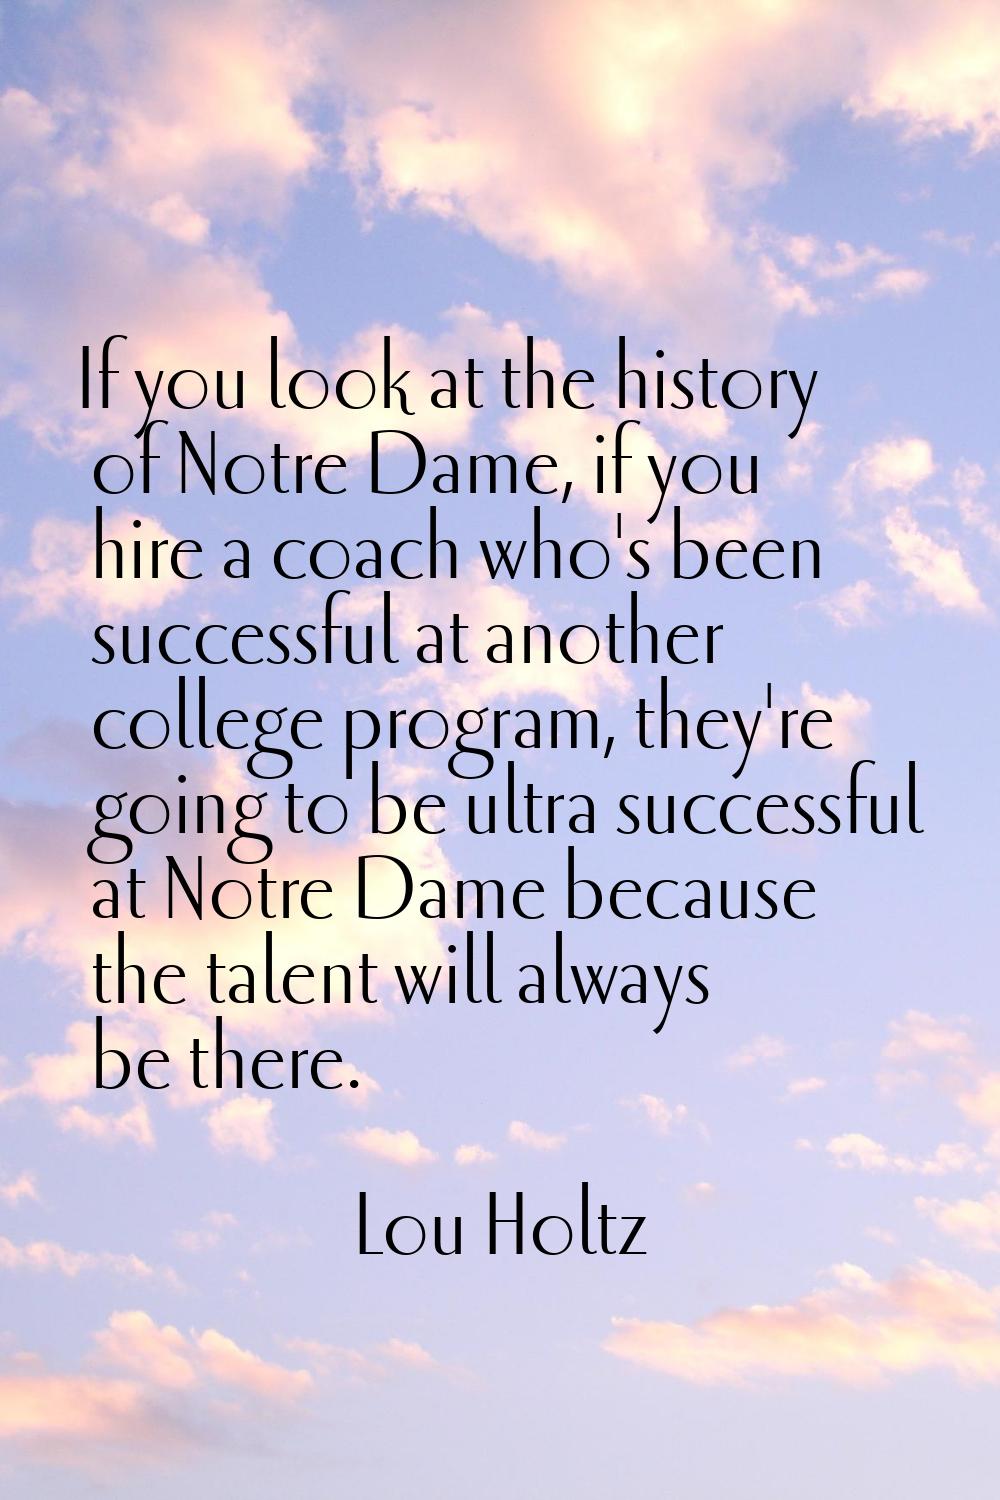 If you look at the history of Notre Dame, if you hire a coach who's been successful at another coll